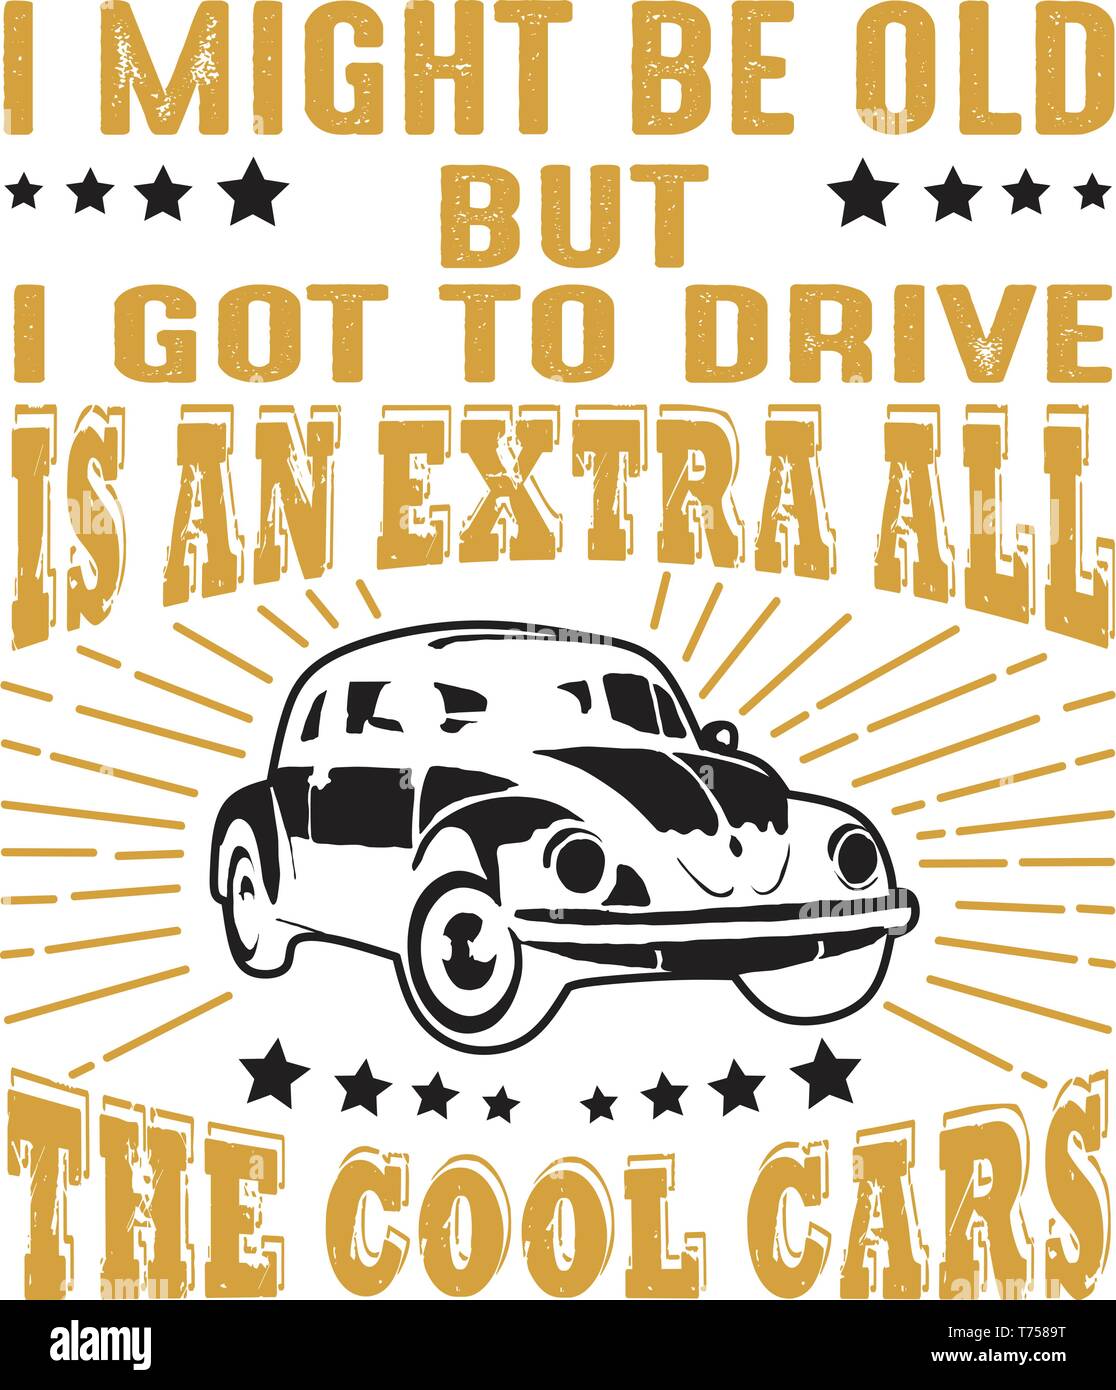 Car Quote and Saying. I might be old but I got to drive Stock Vector